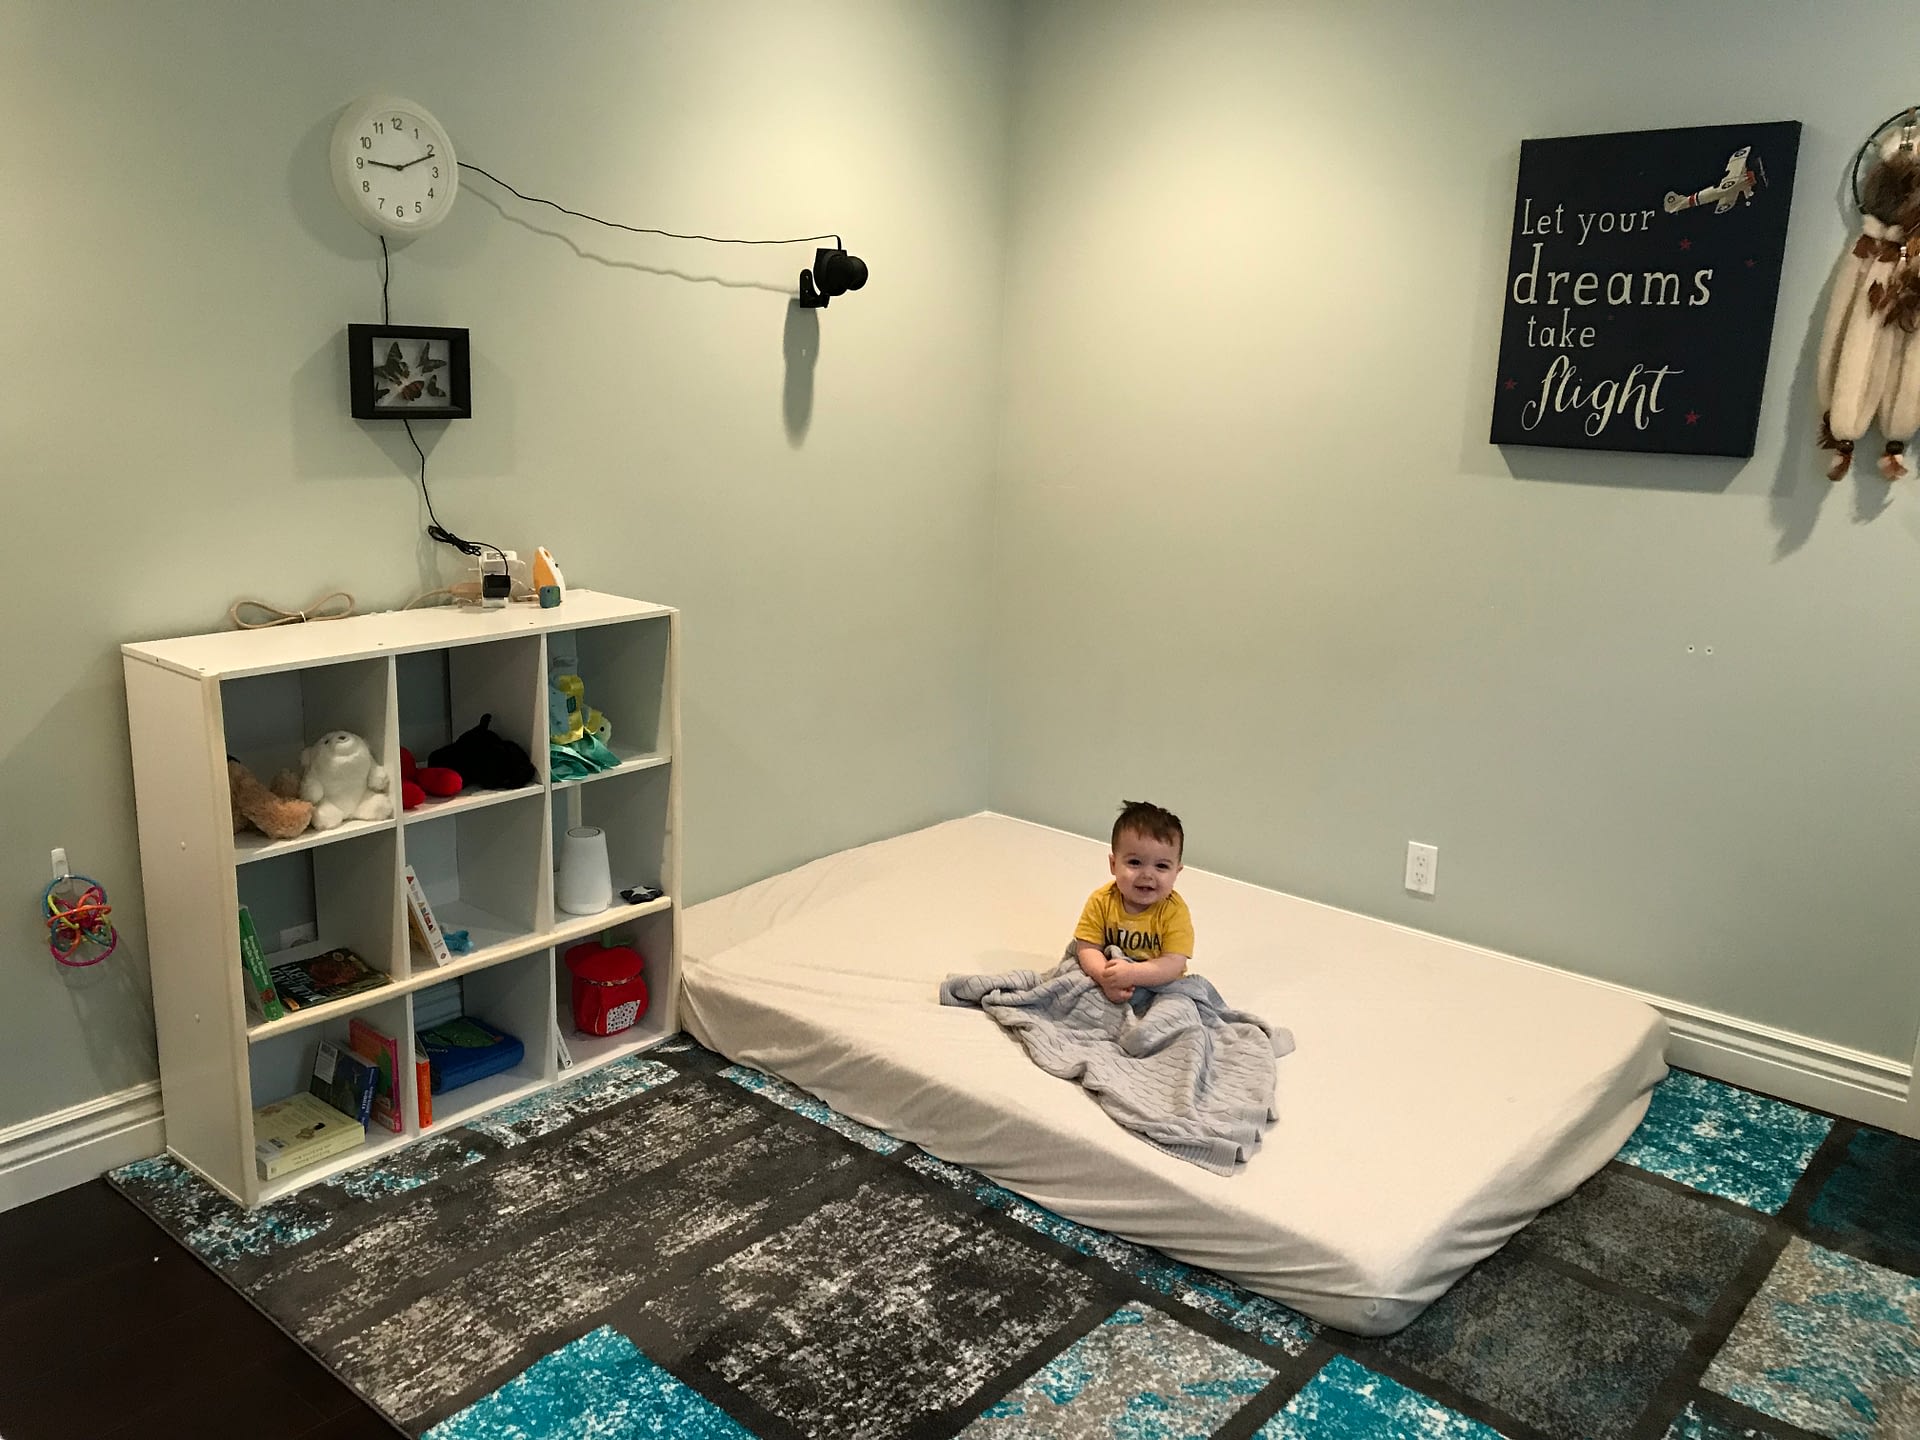 montessori beds for toddlers